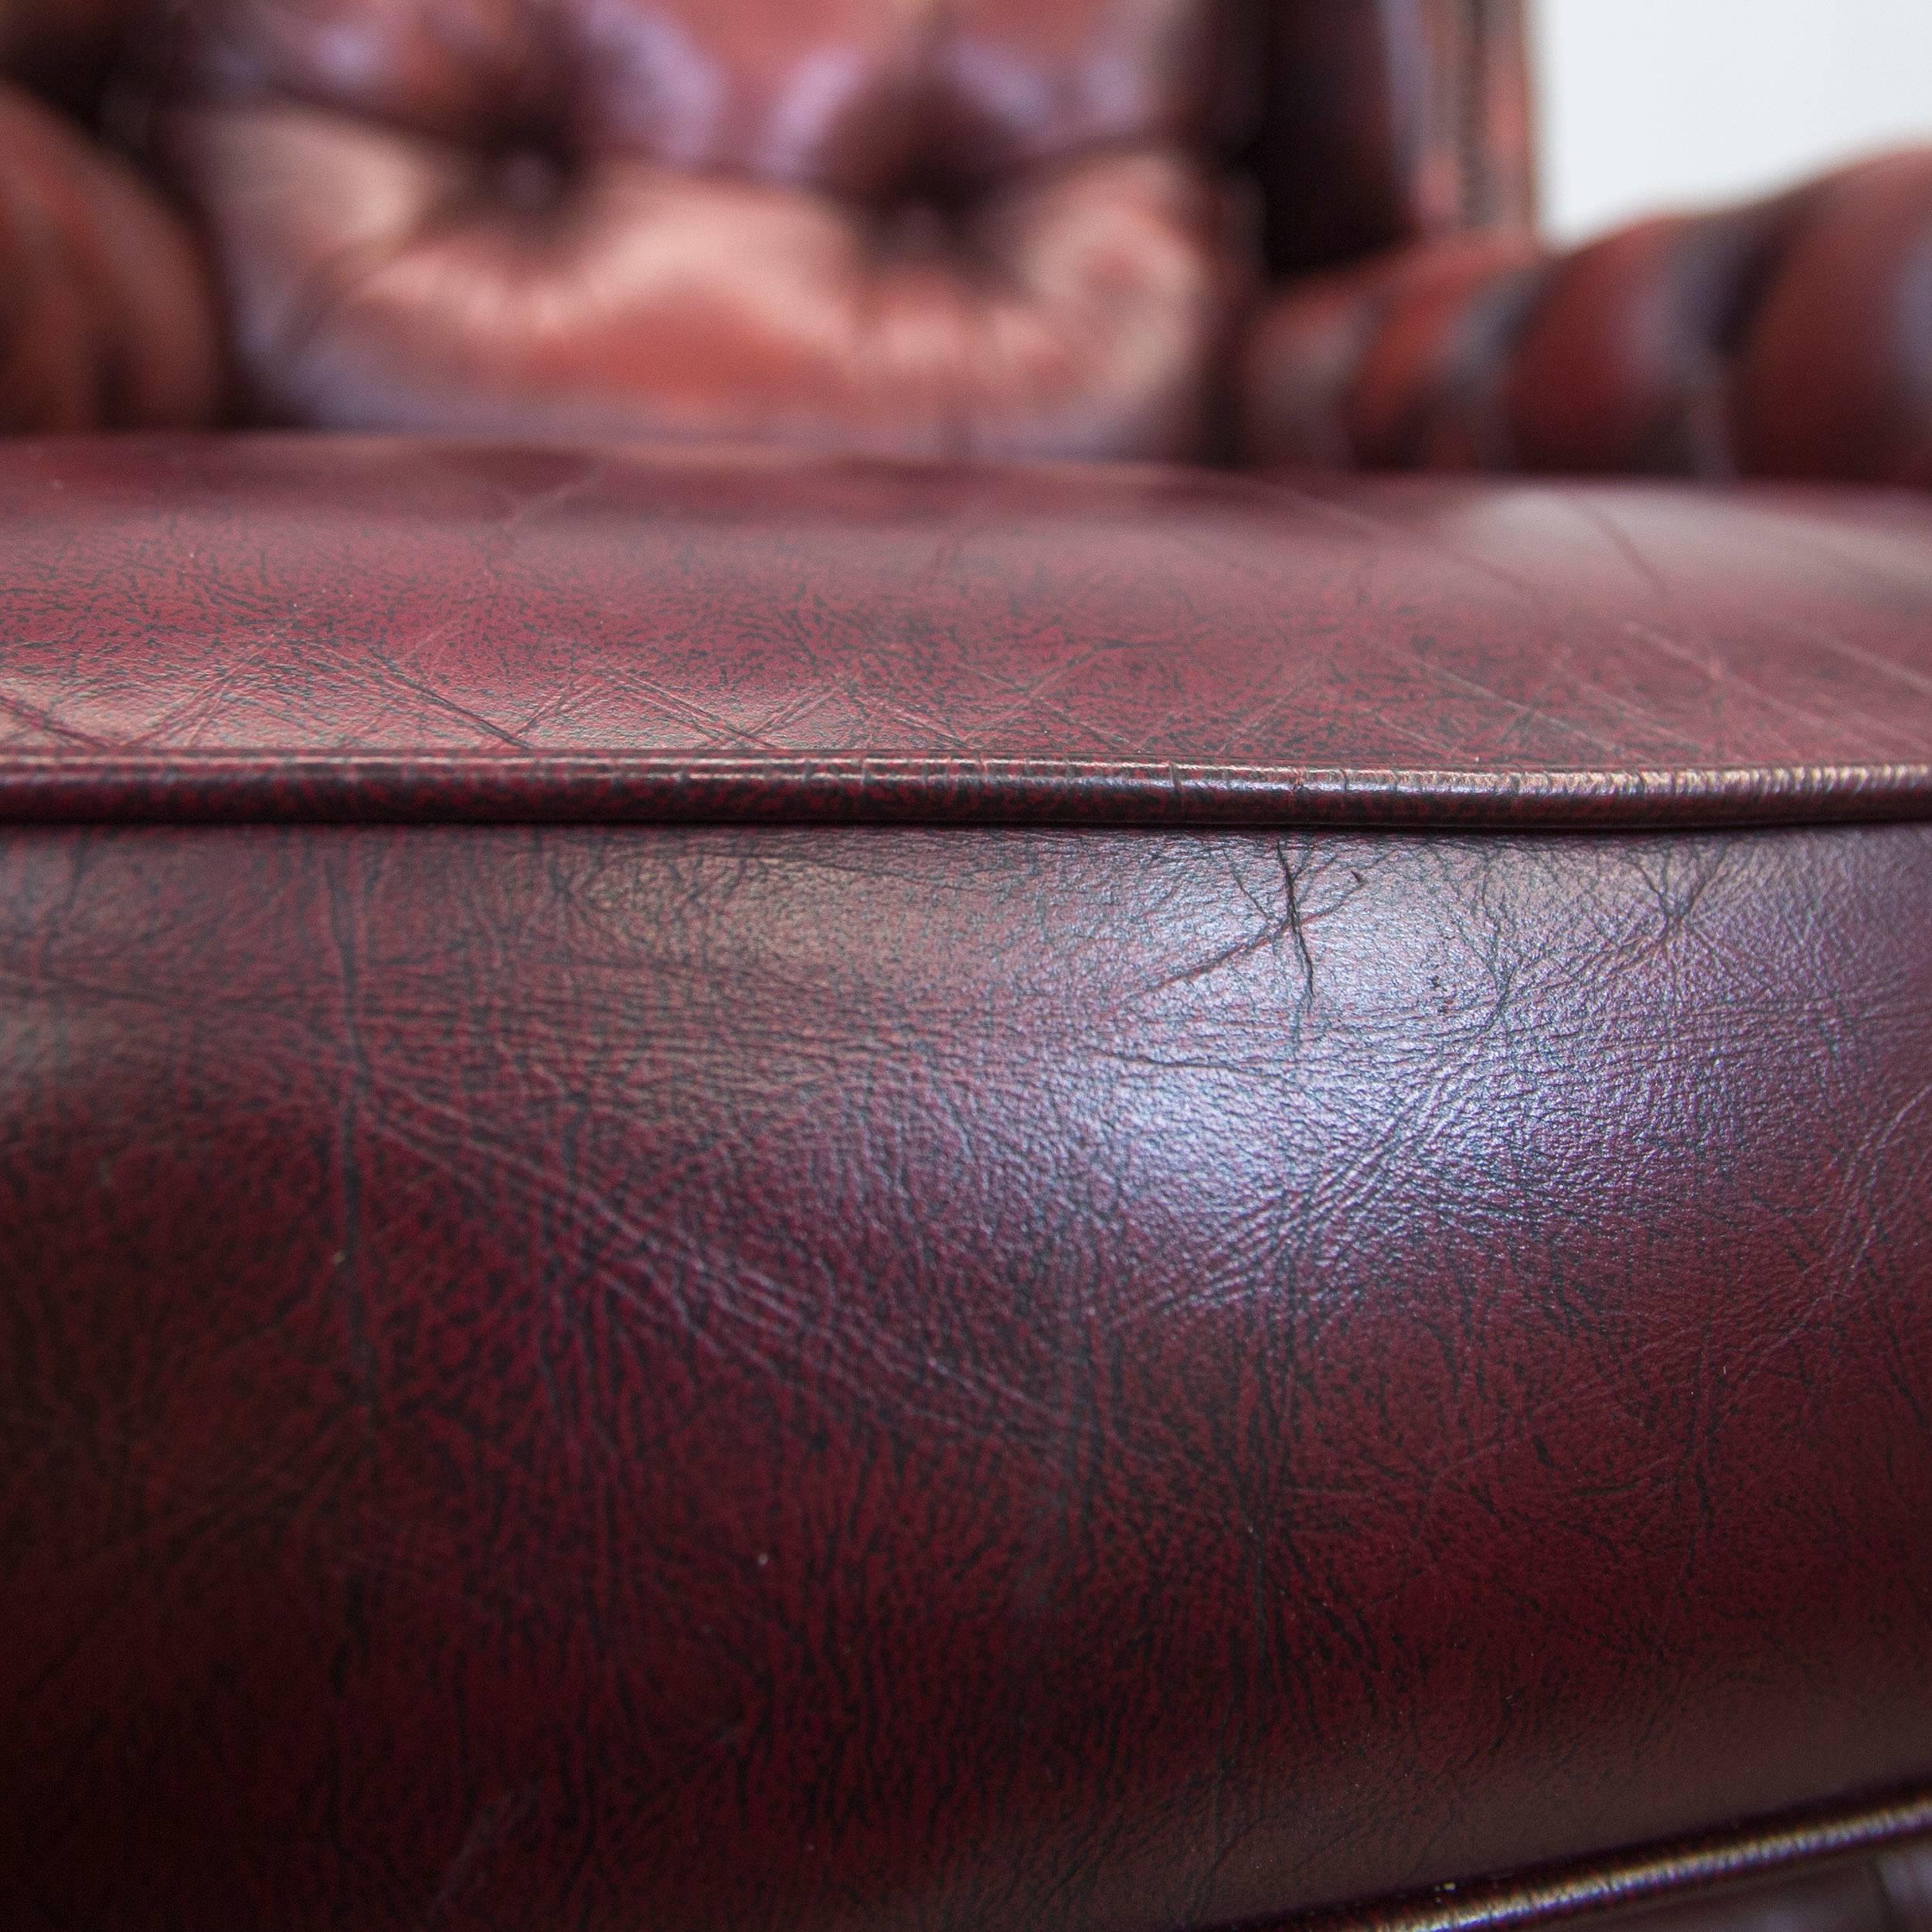 20th Century Chesterfield Leather Armchair Red Brown One Seat Chair Couch Vintage Retro